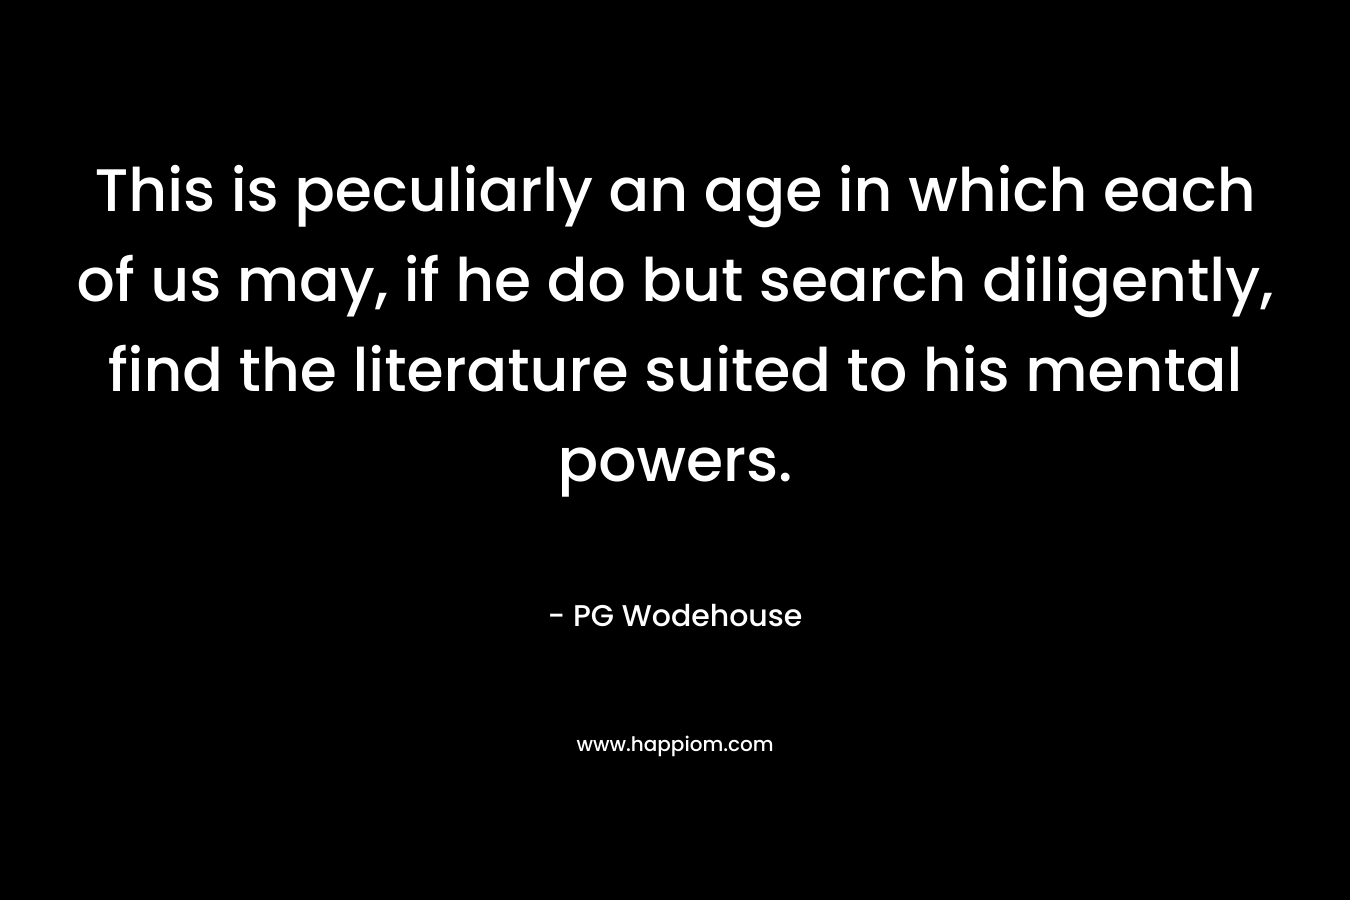 This is peculiarly an age in which each of us may, if he do but search diligently, find the literature suited to his mental powers.